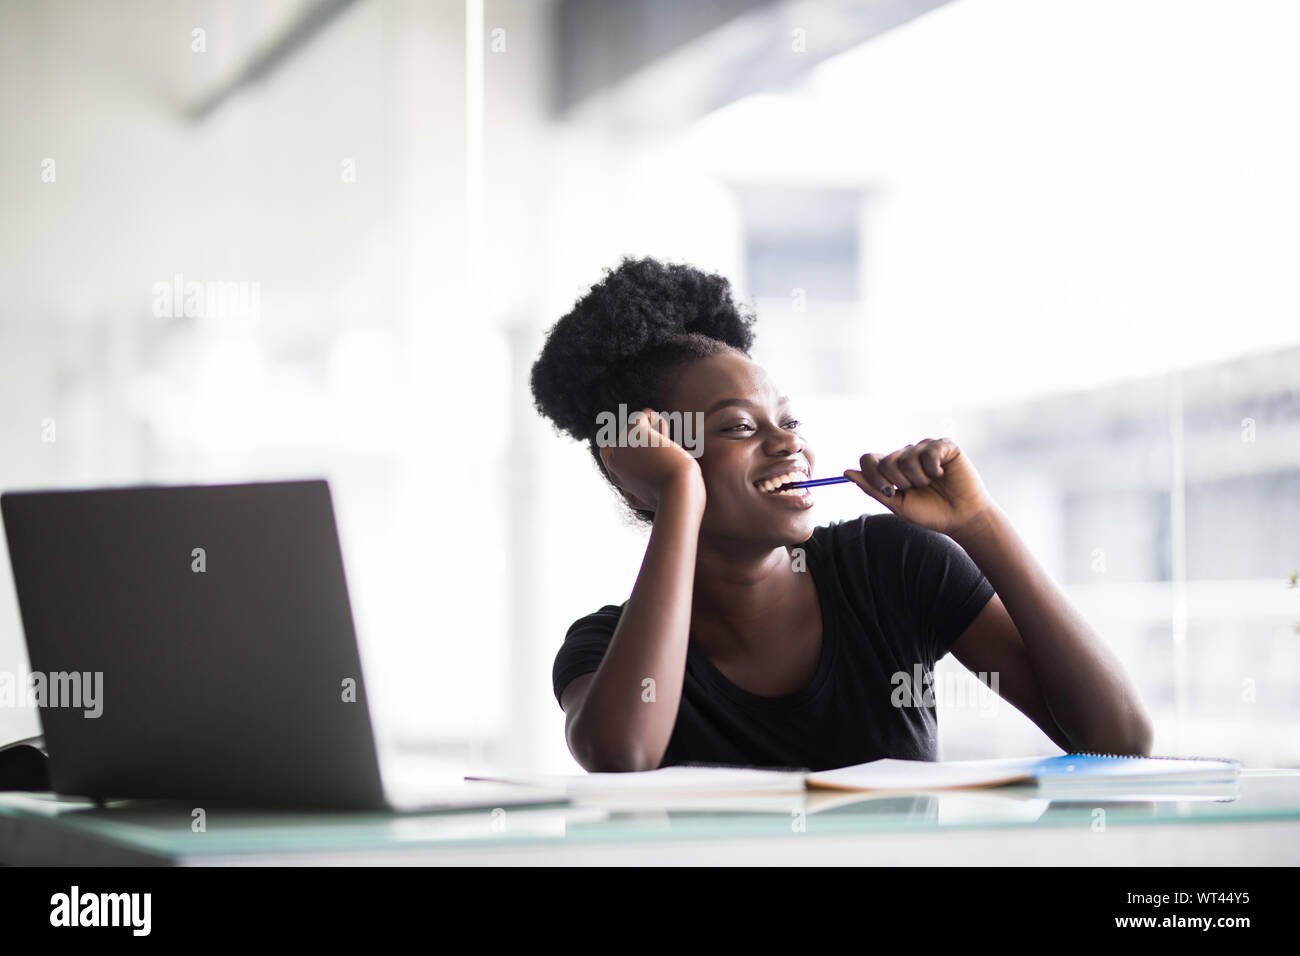 Portrait of young woman working on laptop in office Banque D'Images